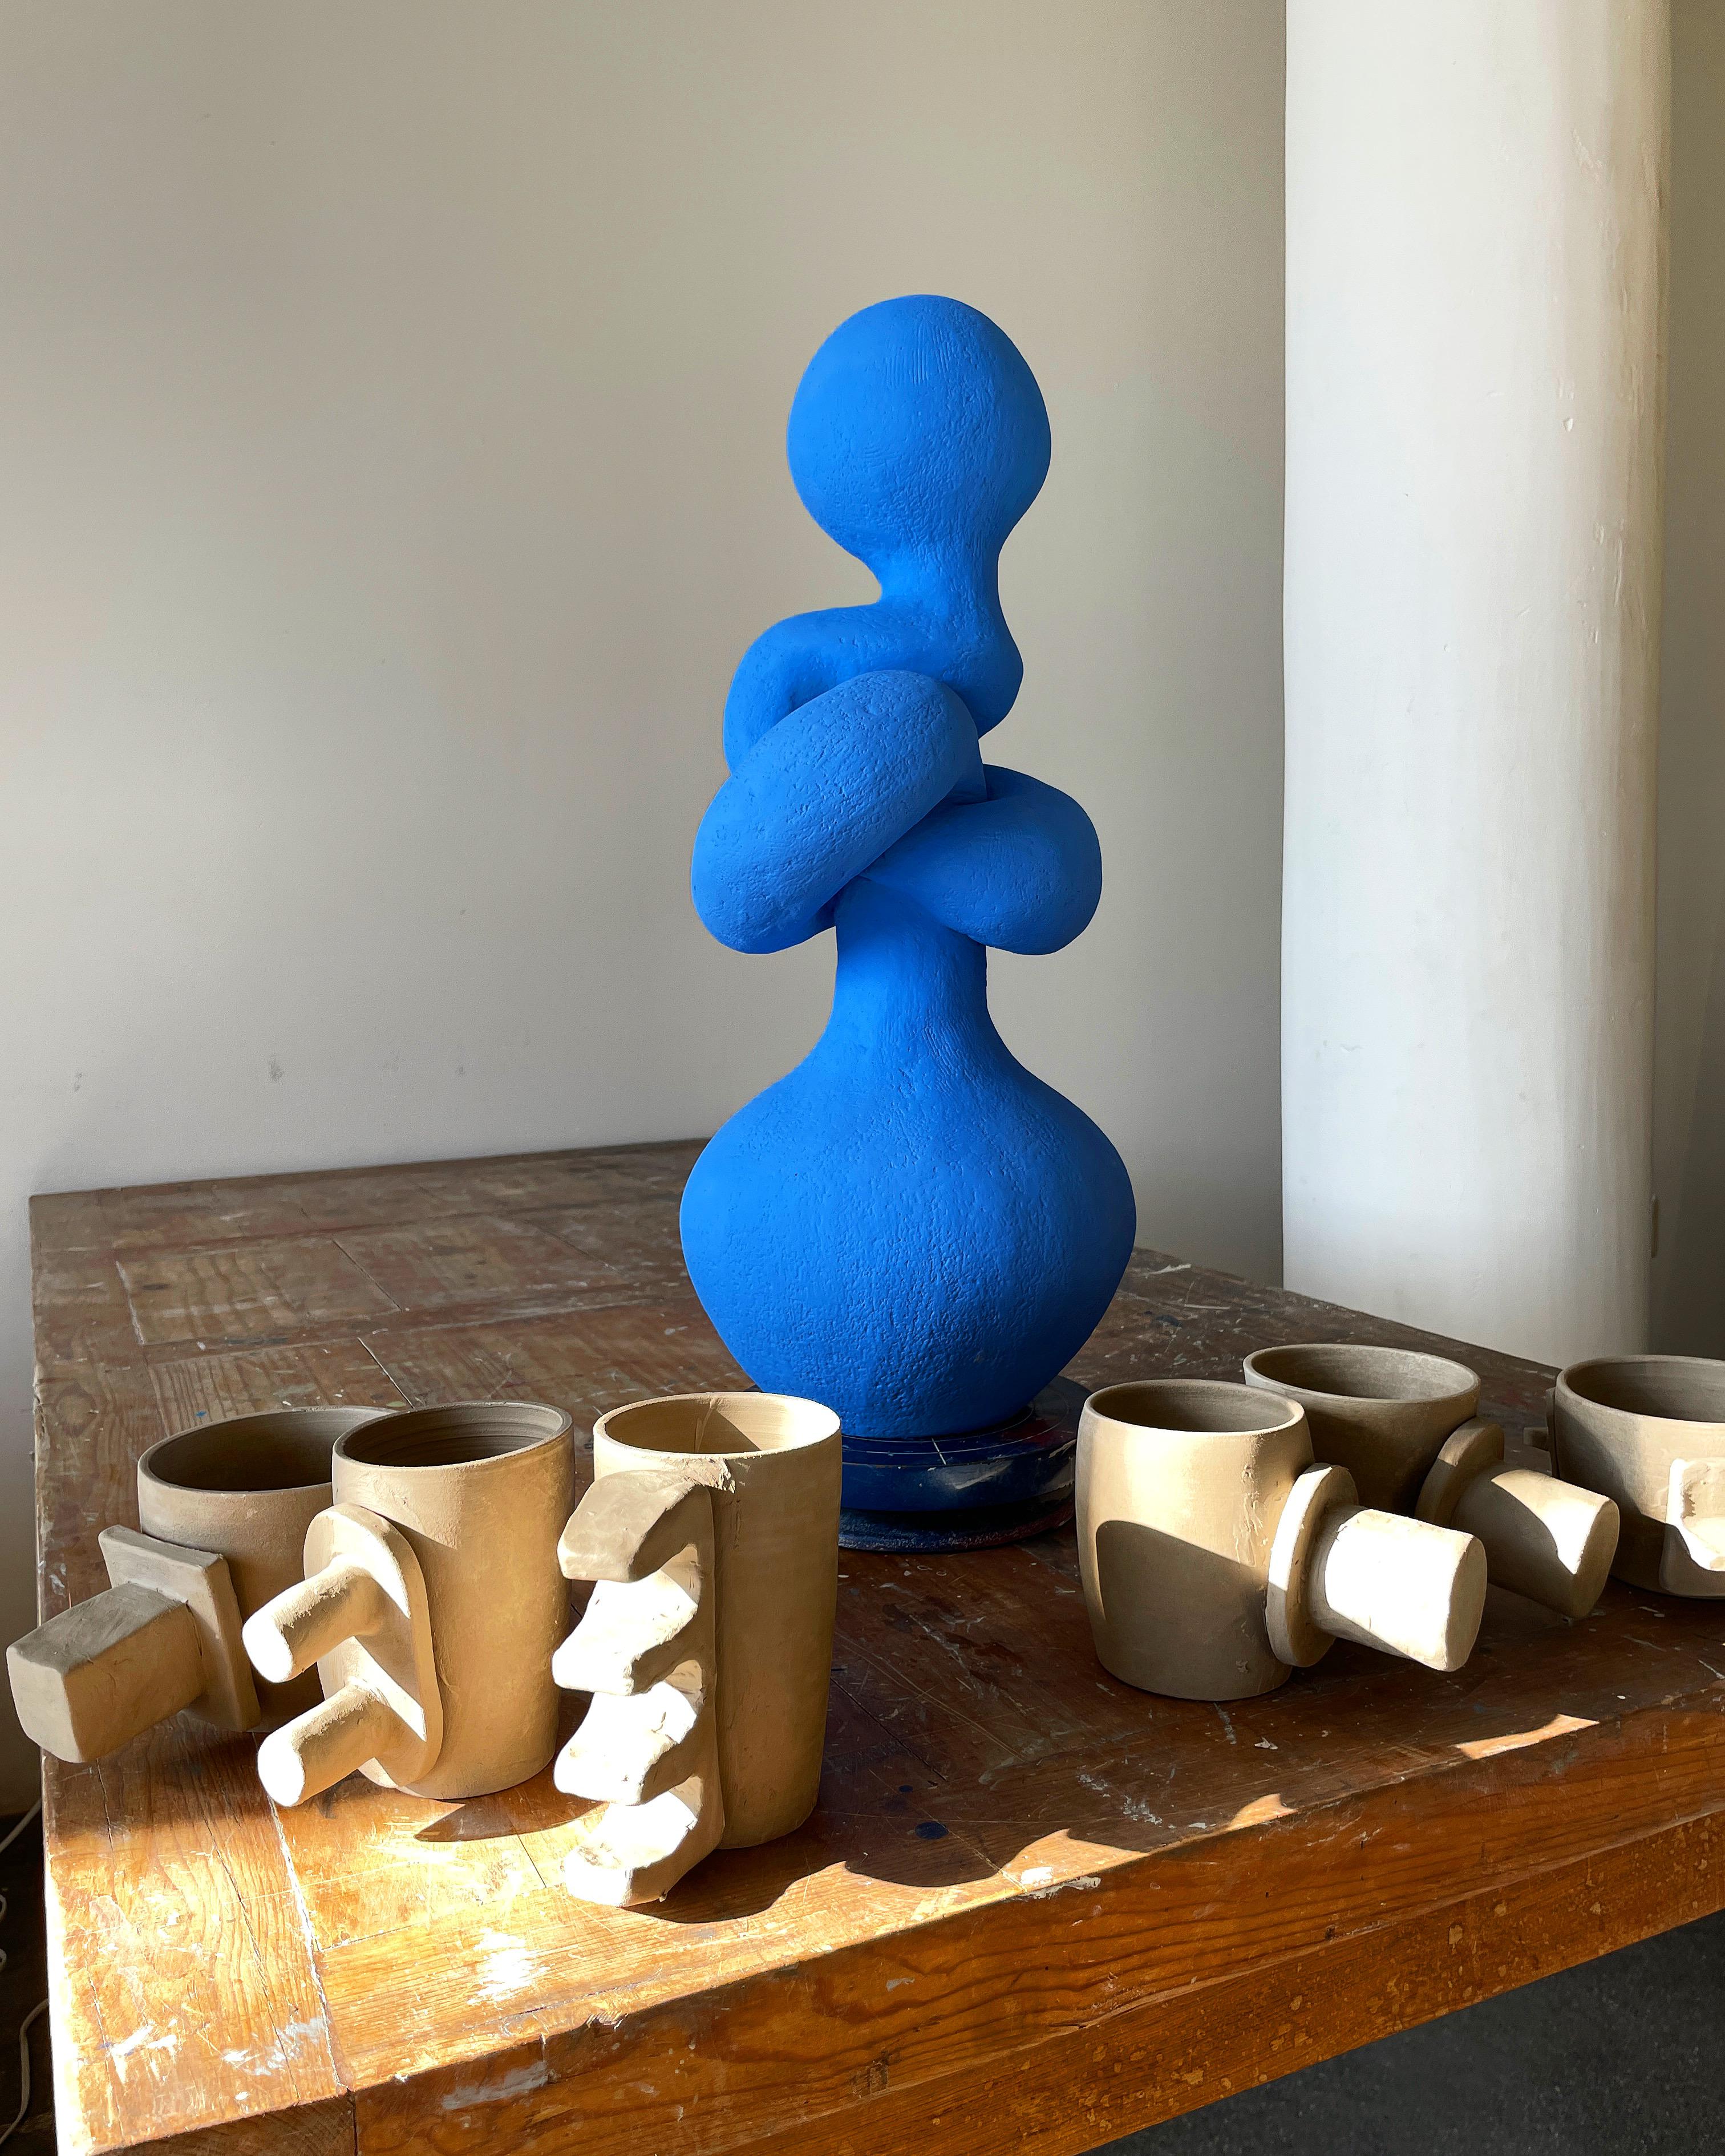 Contemporary Knot Table Sculpture or Lamp, in Electrablue, Handmade by Artist Stef Duffy For Sale